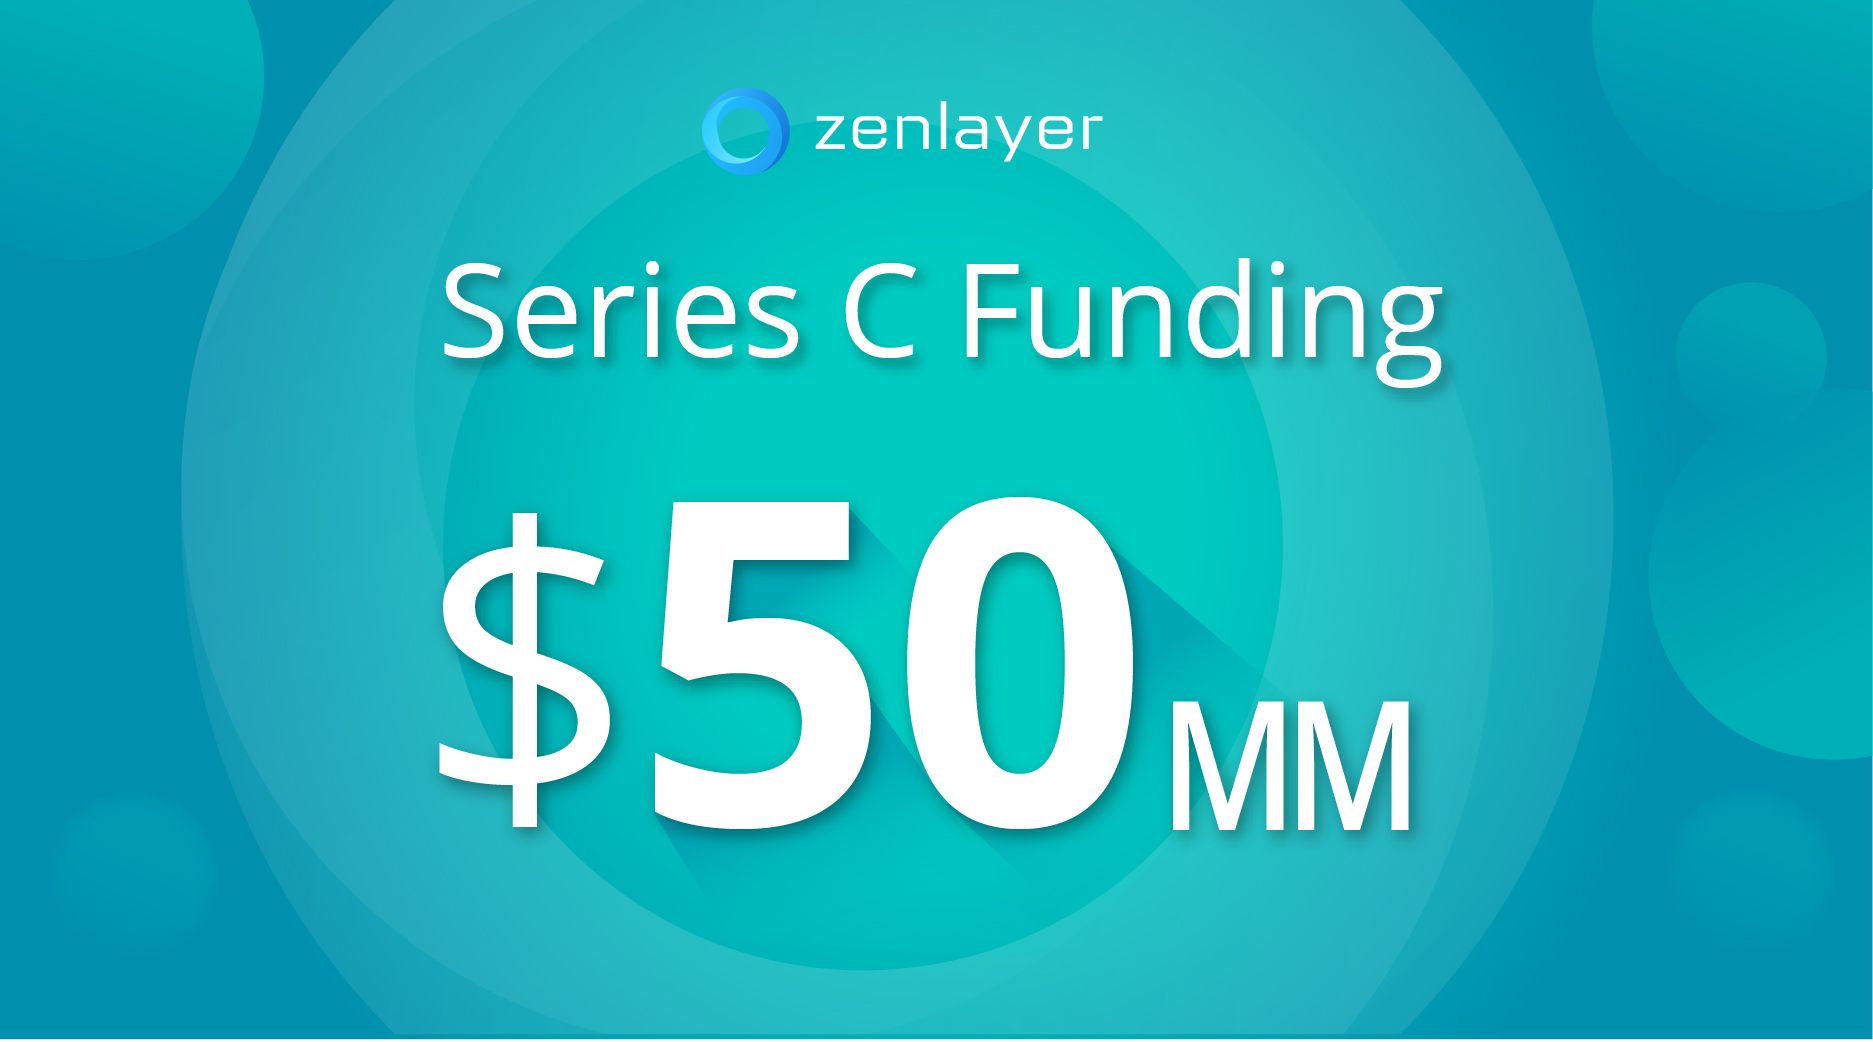 Zenlayer Raises $50MM in Series C Financing to Boost Its Lead in Edge Cloud Services 